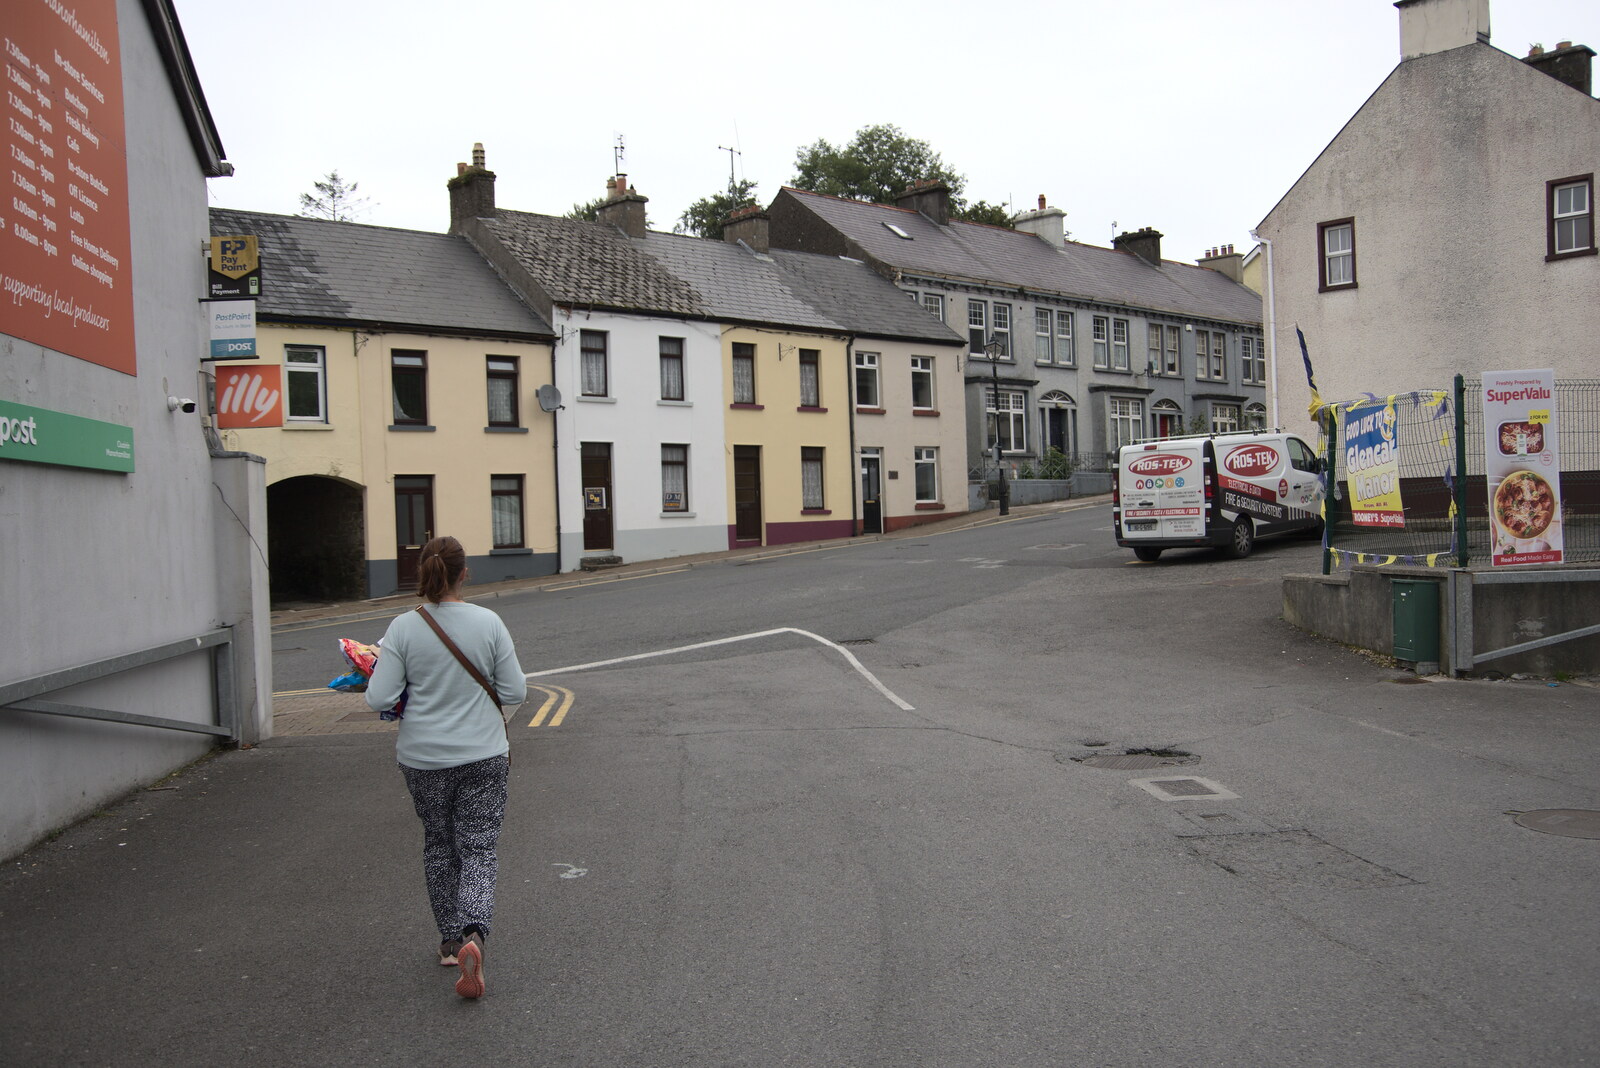 Isobel walks off with some bags of Tayto from Manorhamilton and the Street Art of Dún Laoghaire, Ireland - 15th August 2021